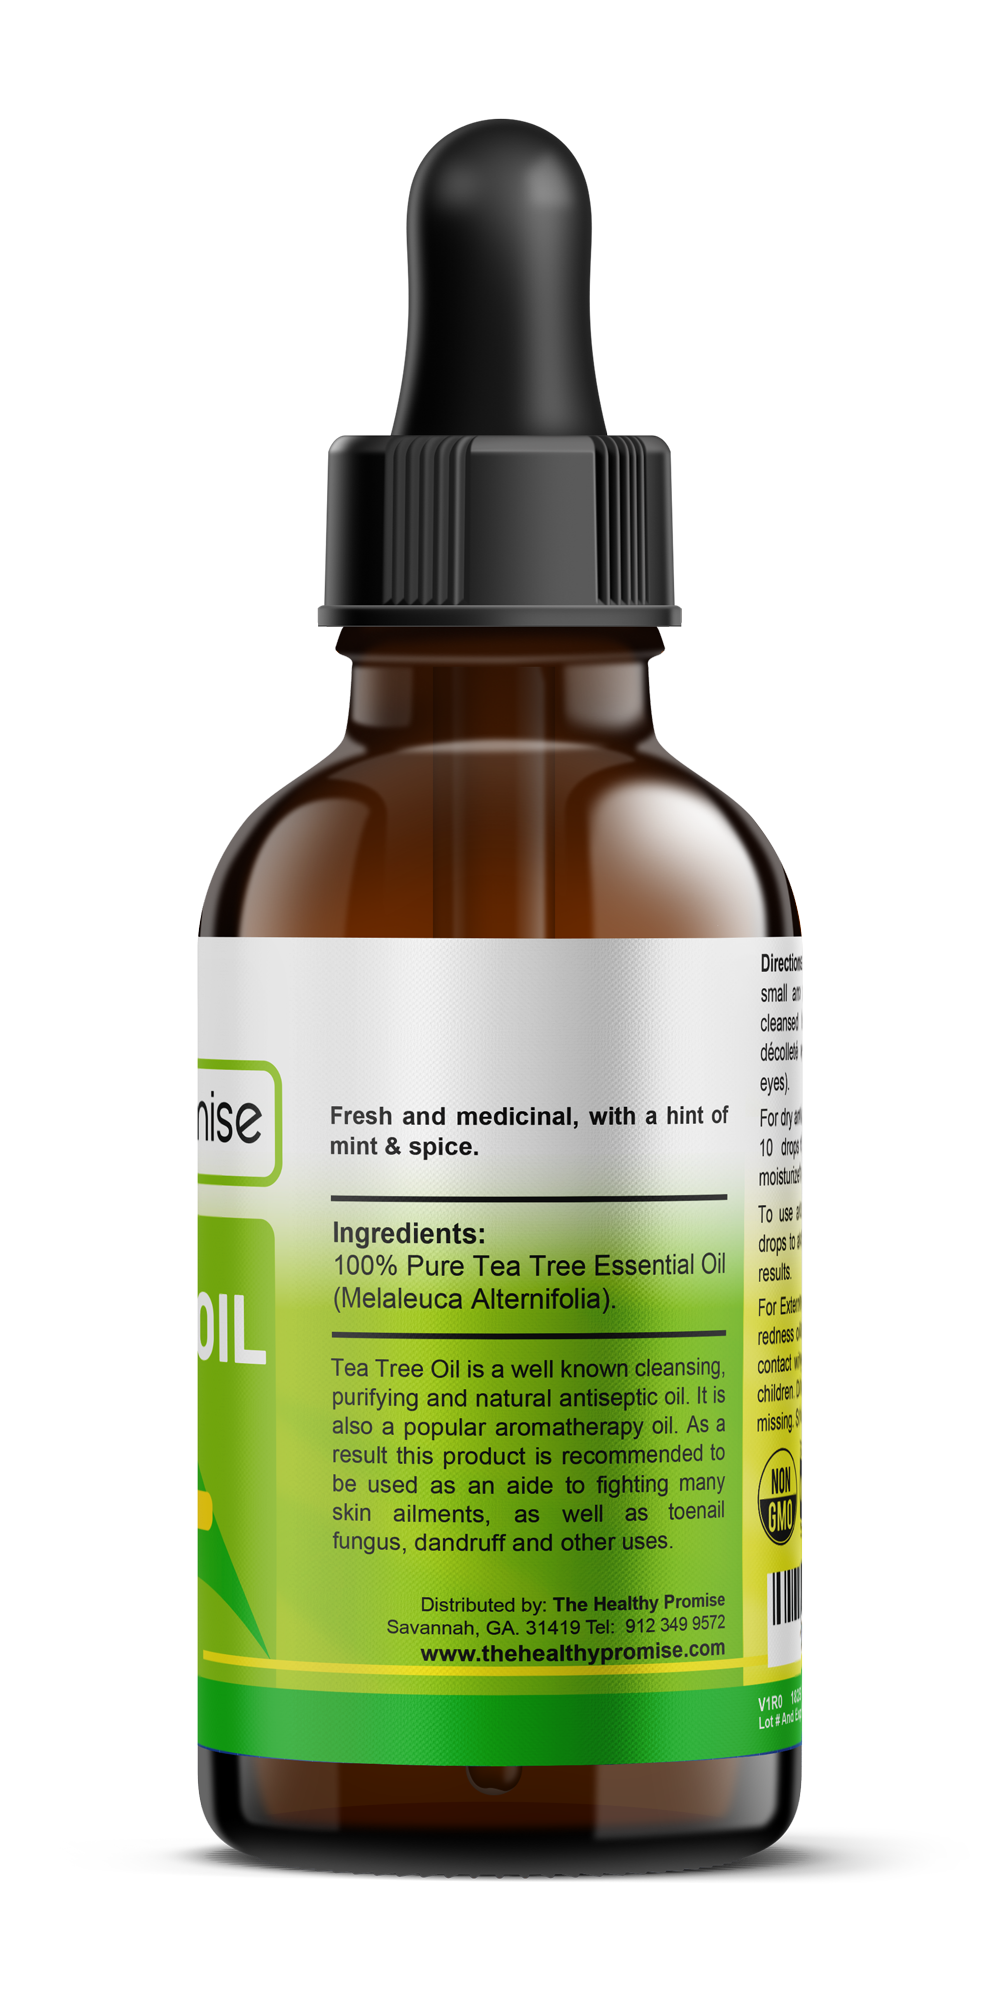 the healthy promise tea tree oil dietary vitamin supplement ingredients